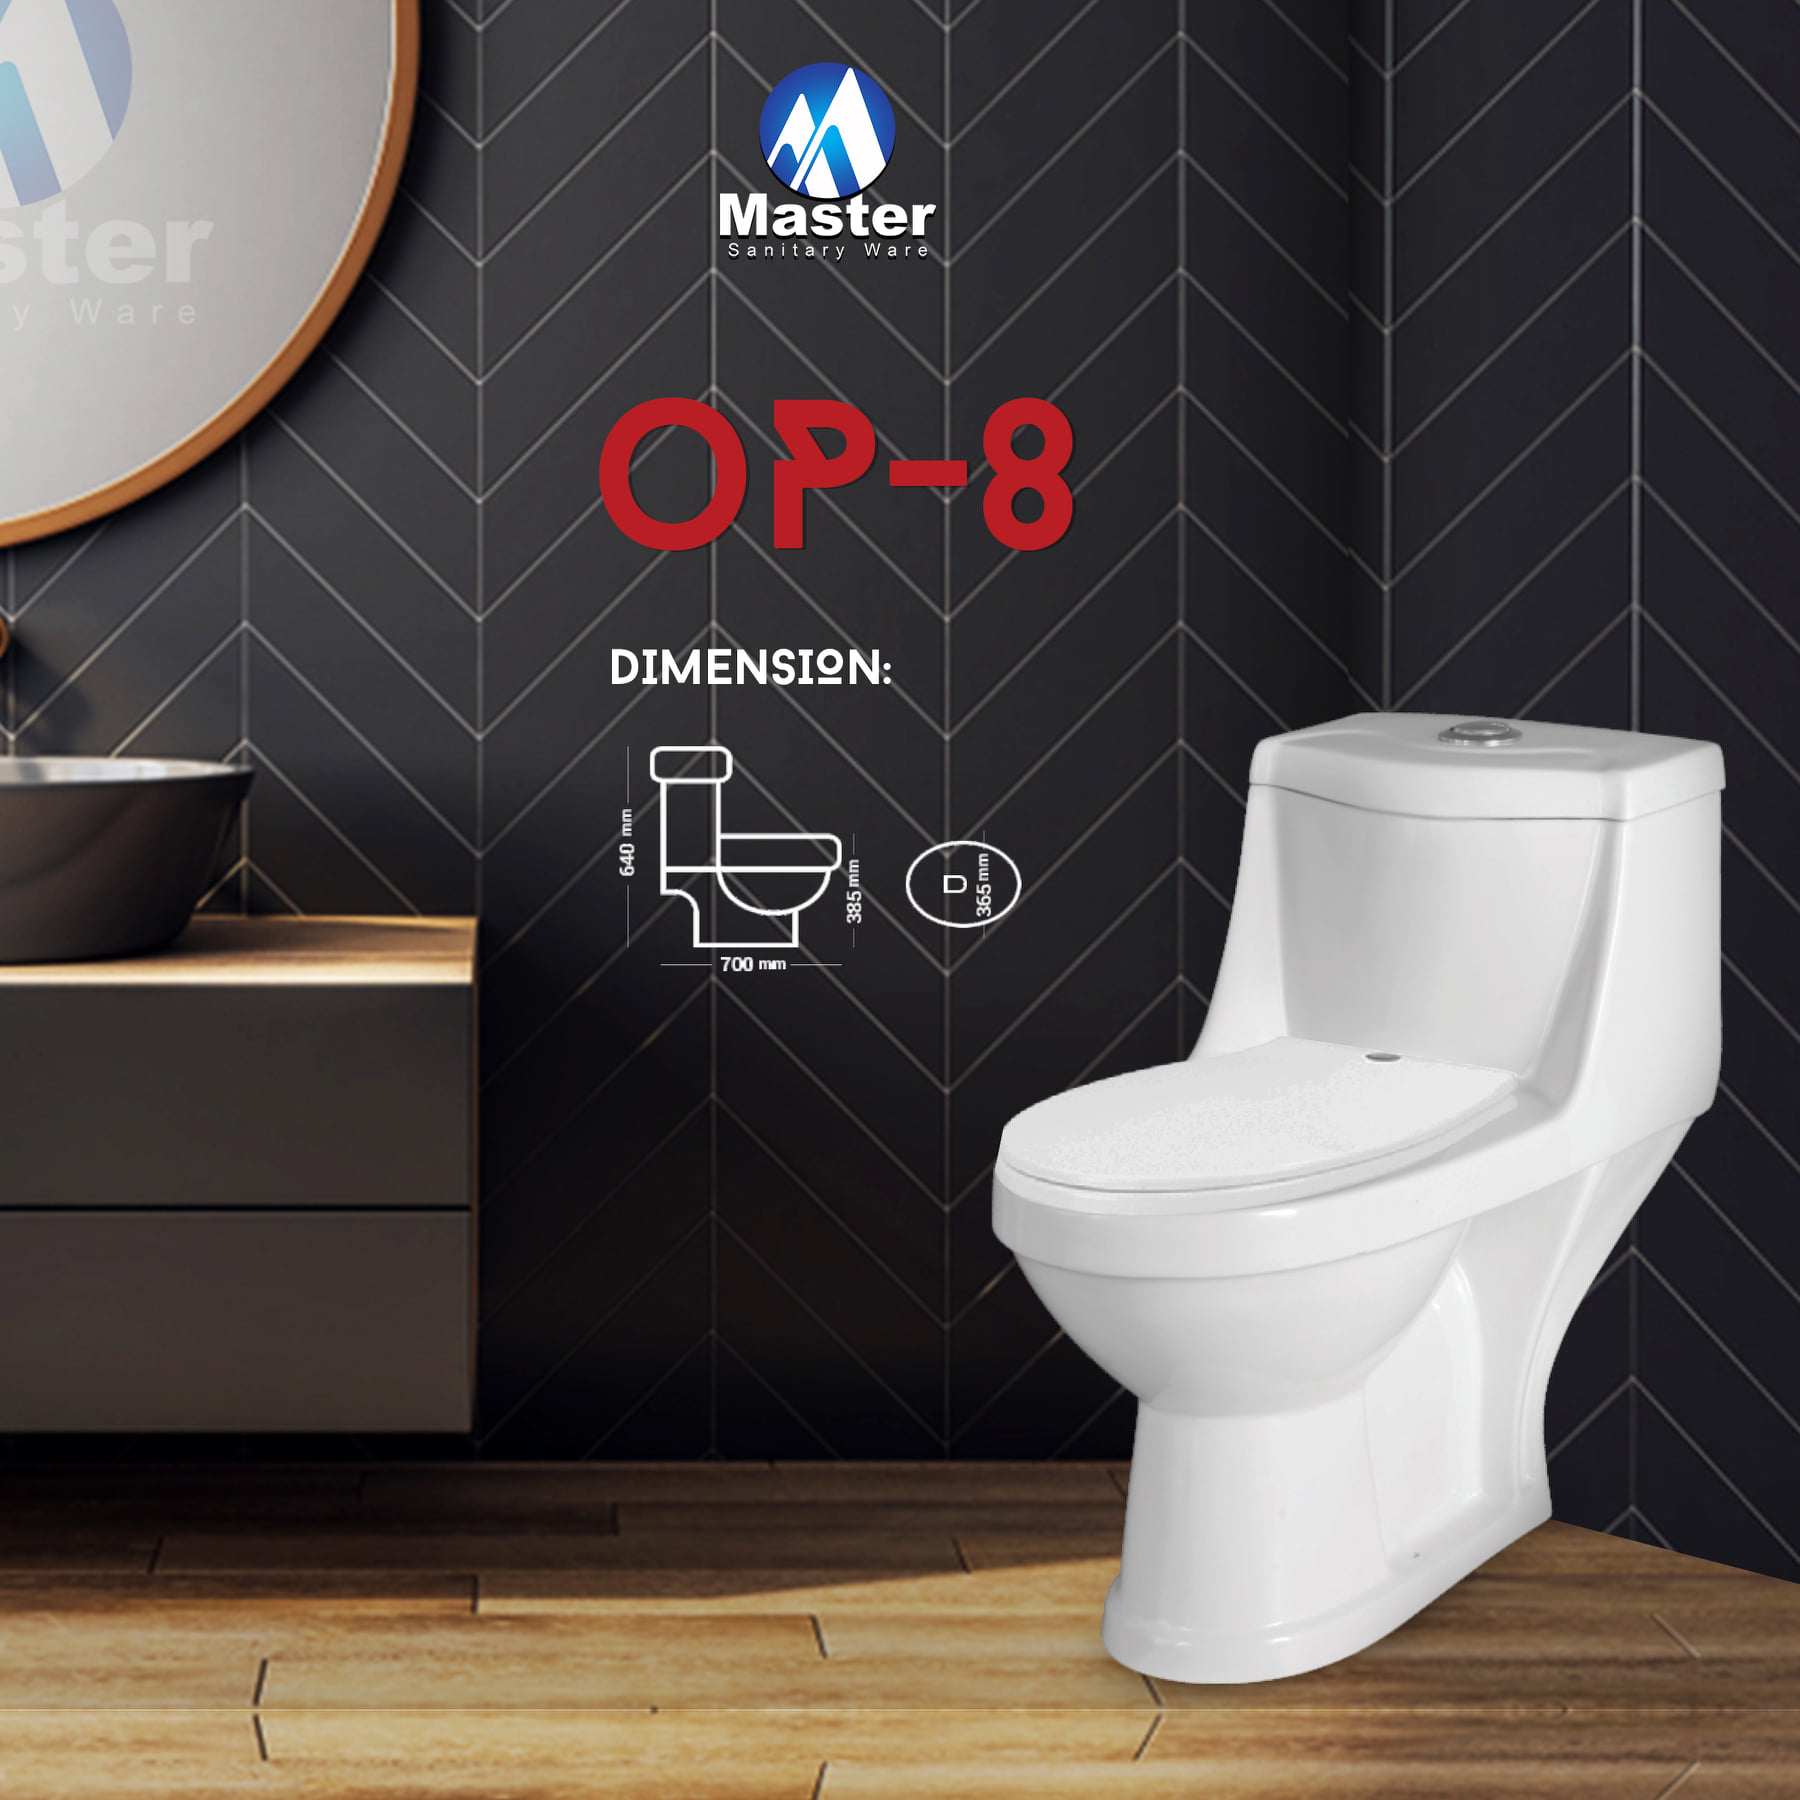 1-Piece Commode Code OP 08 Master Sanitary Ware